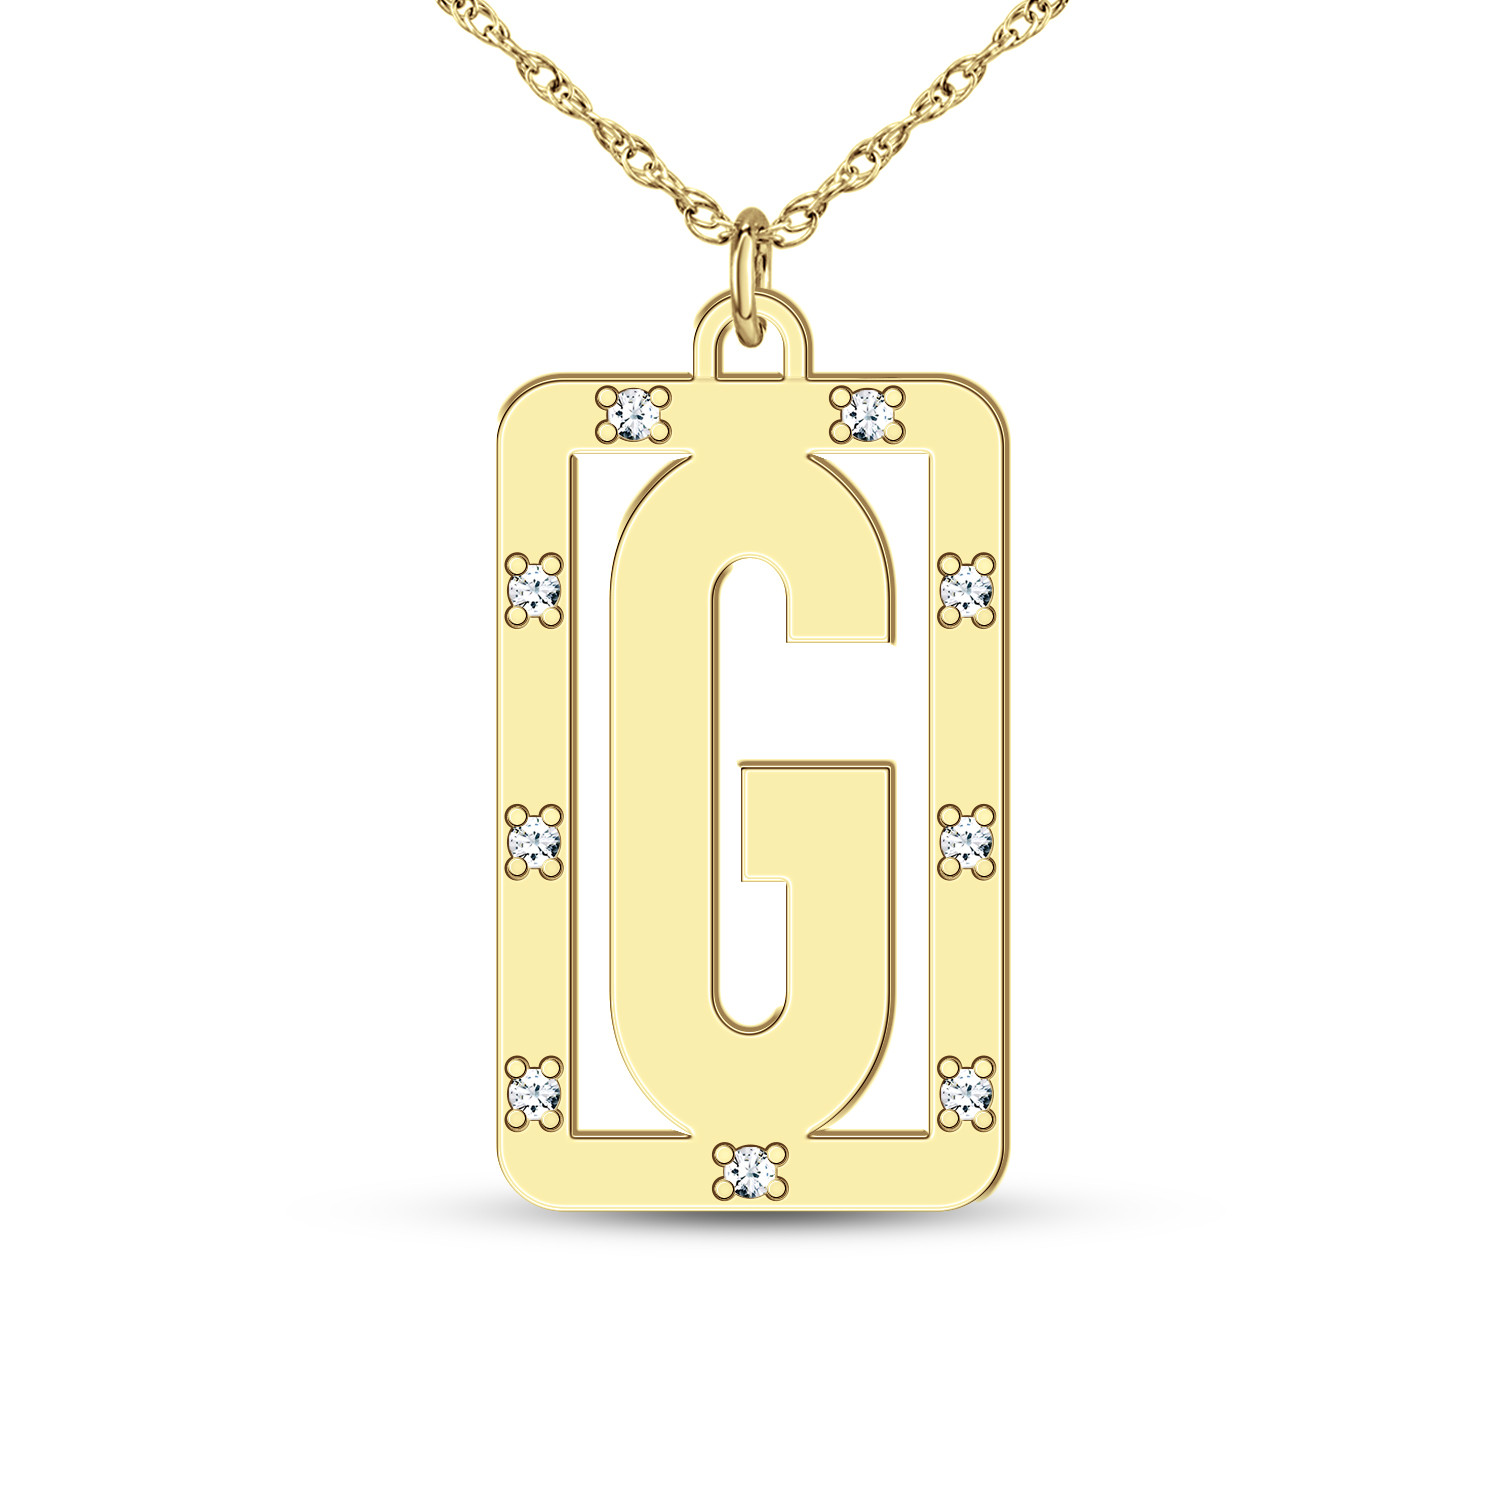 Alexandra Marks Jewelry Letter V Modern Initial Necklace